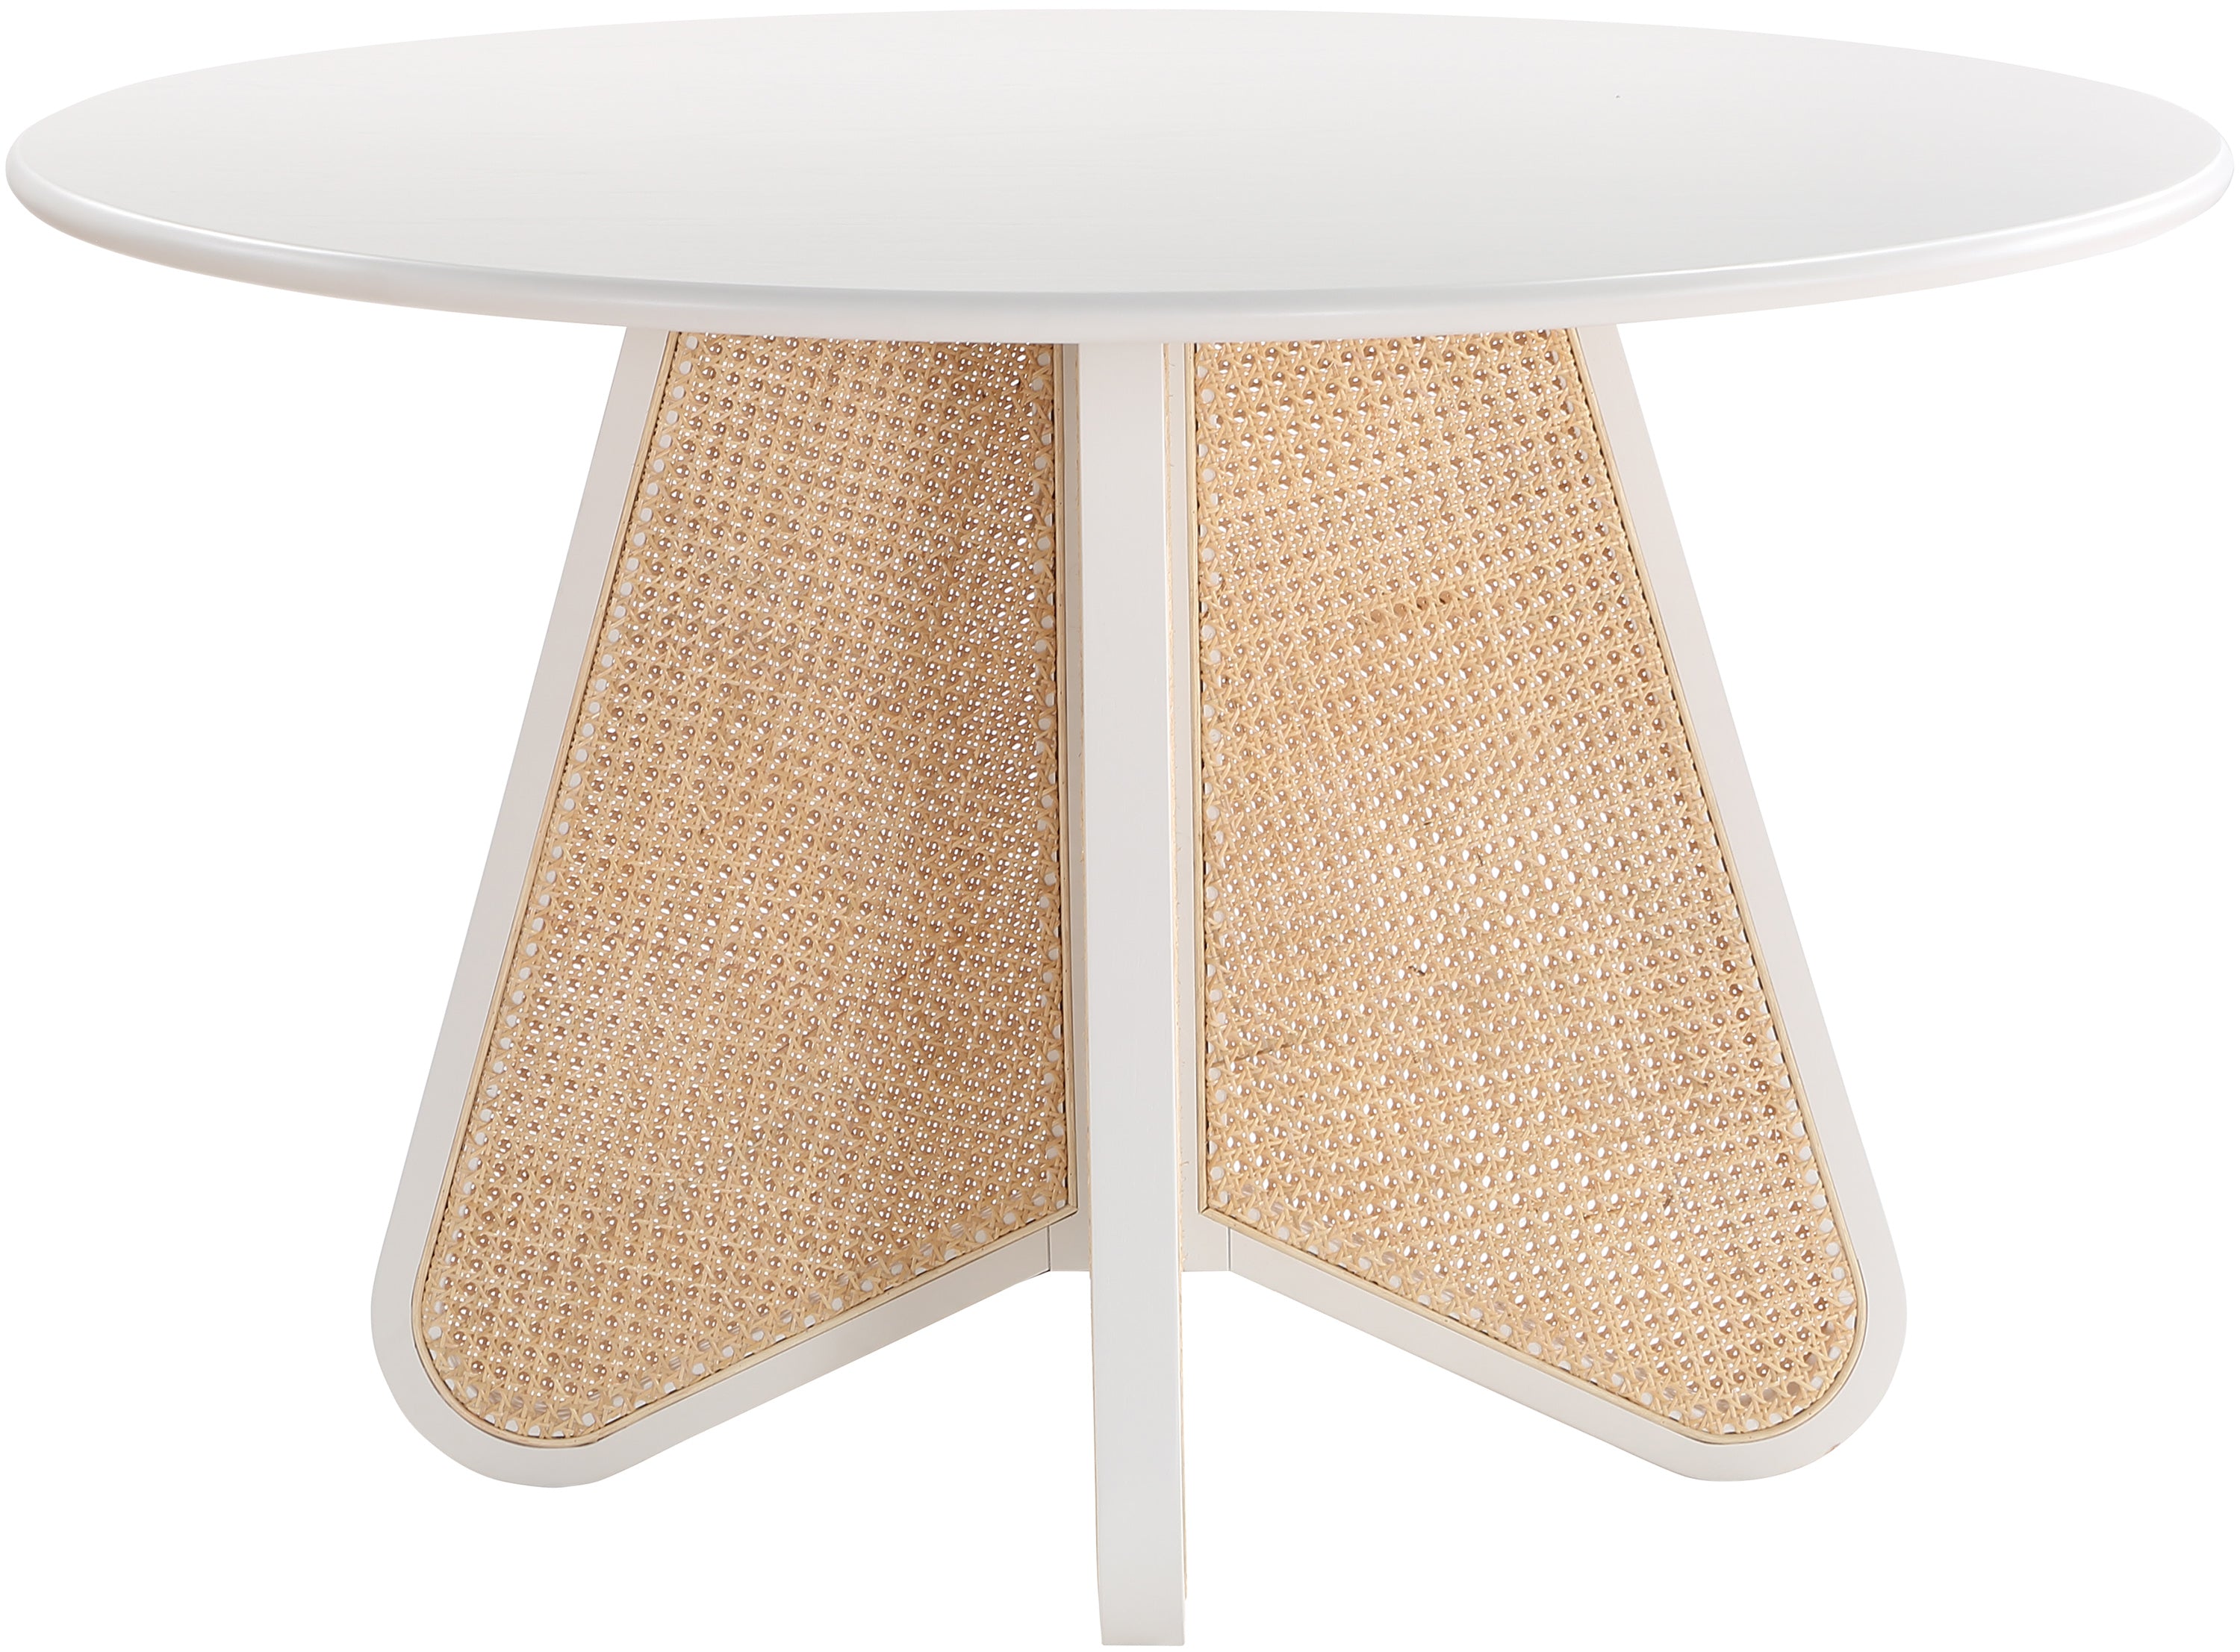 BUTTERFLY DINING TABLE - WHITE